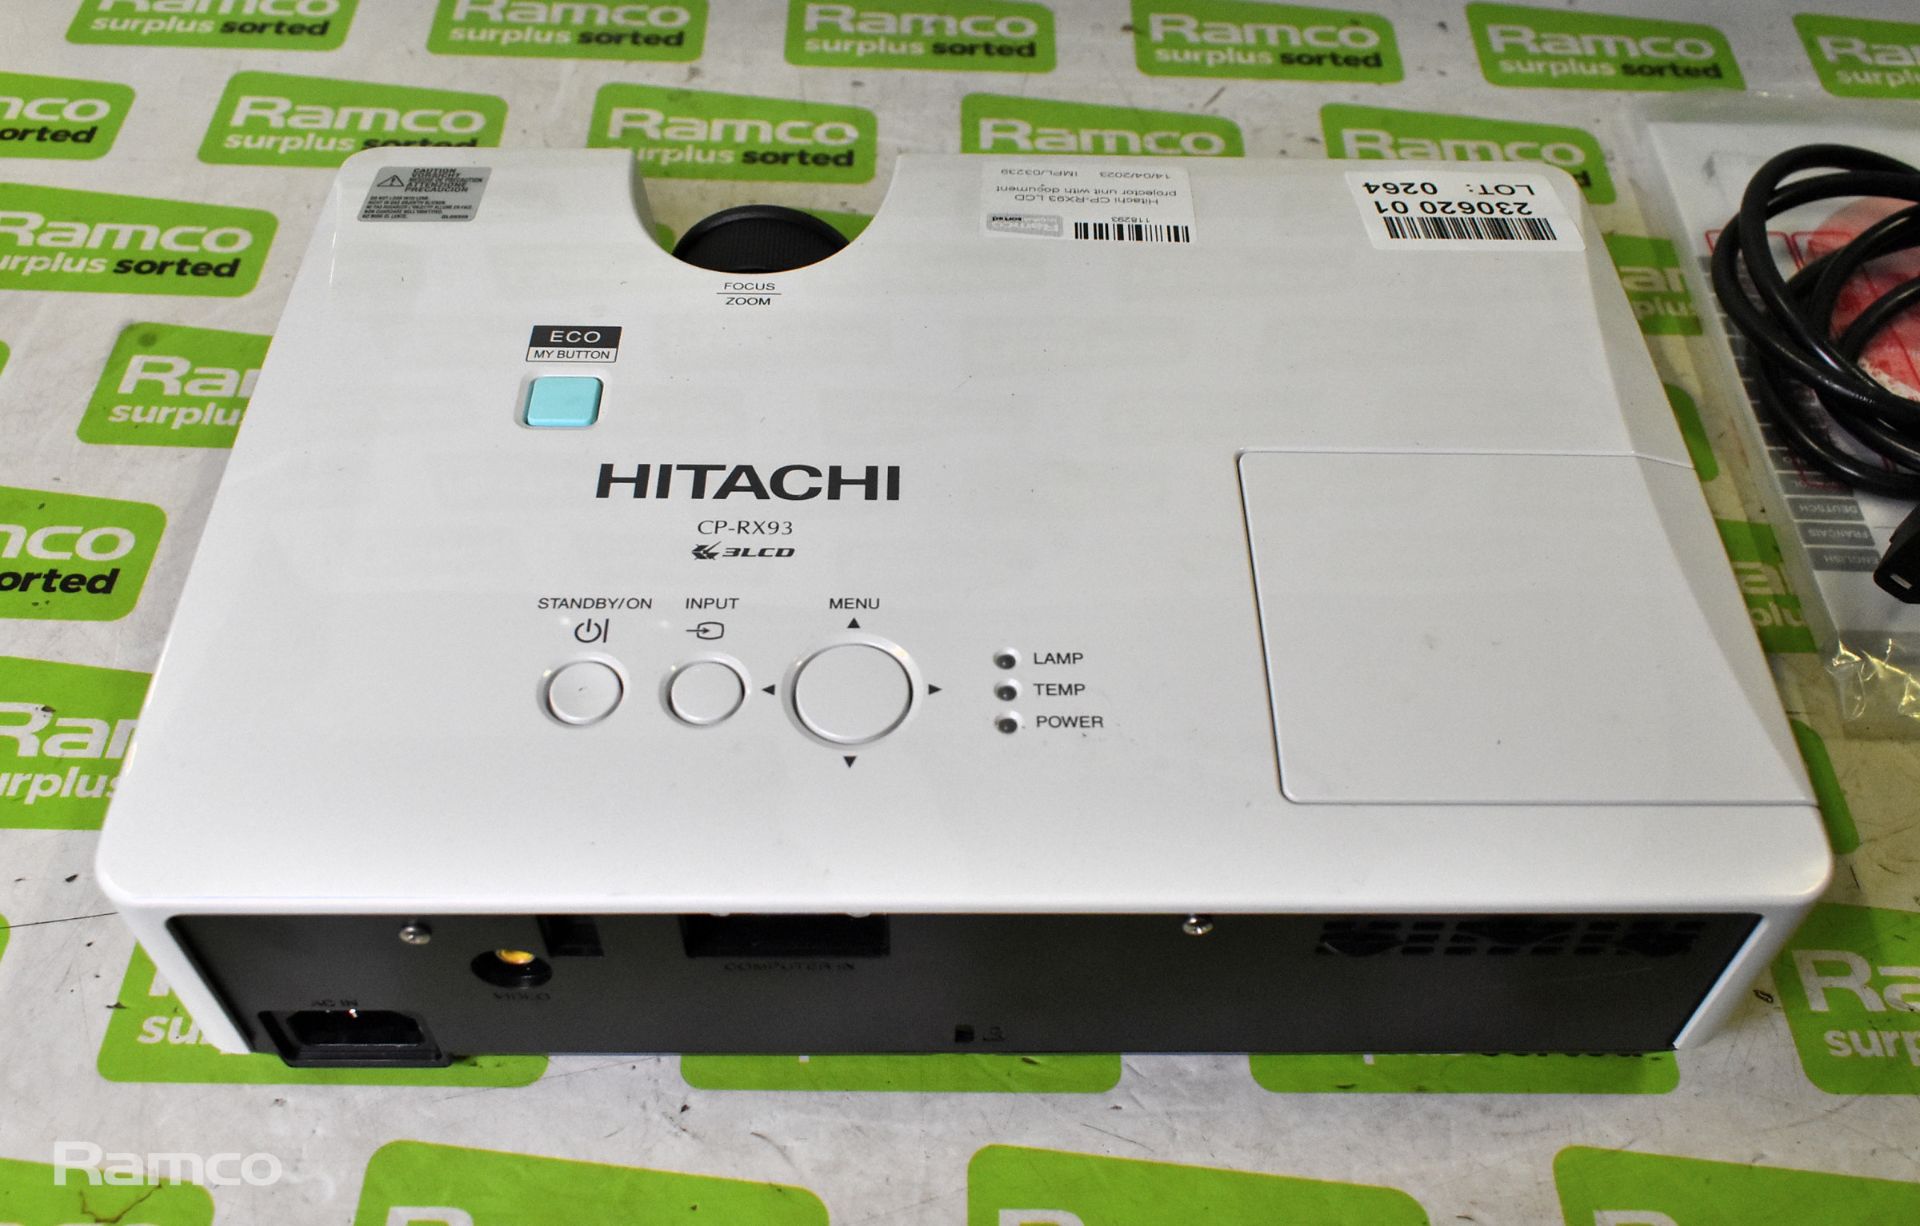 Hitachi CP-RX93 LCD projector unit with document - Image 2 of 4